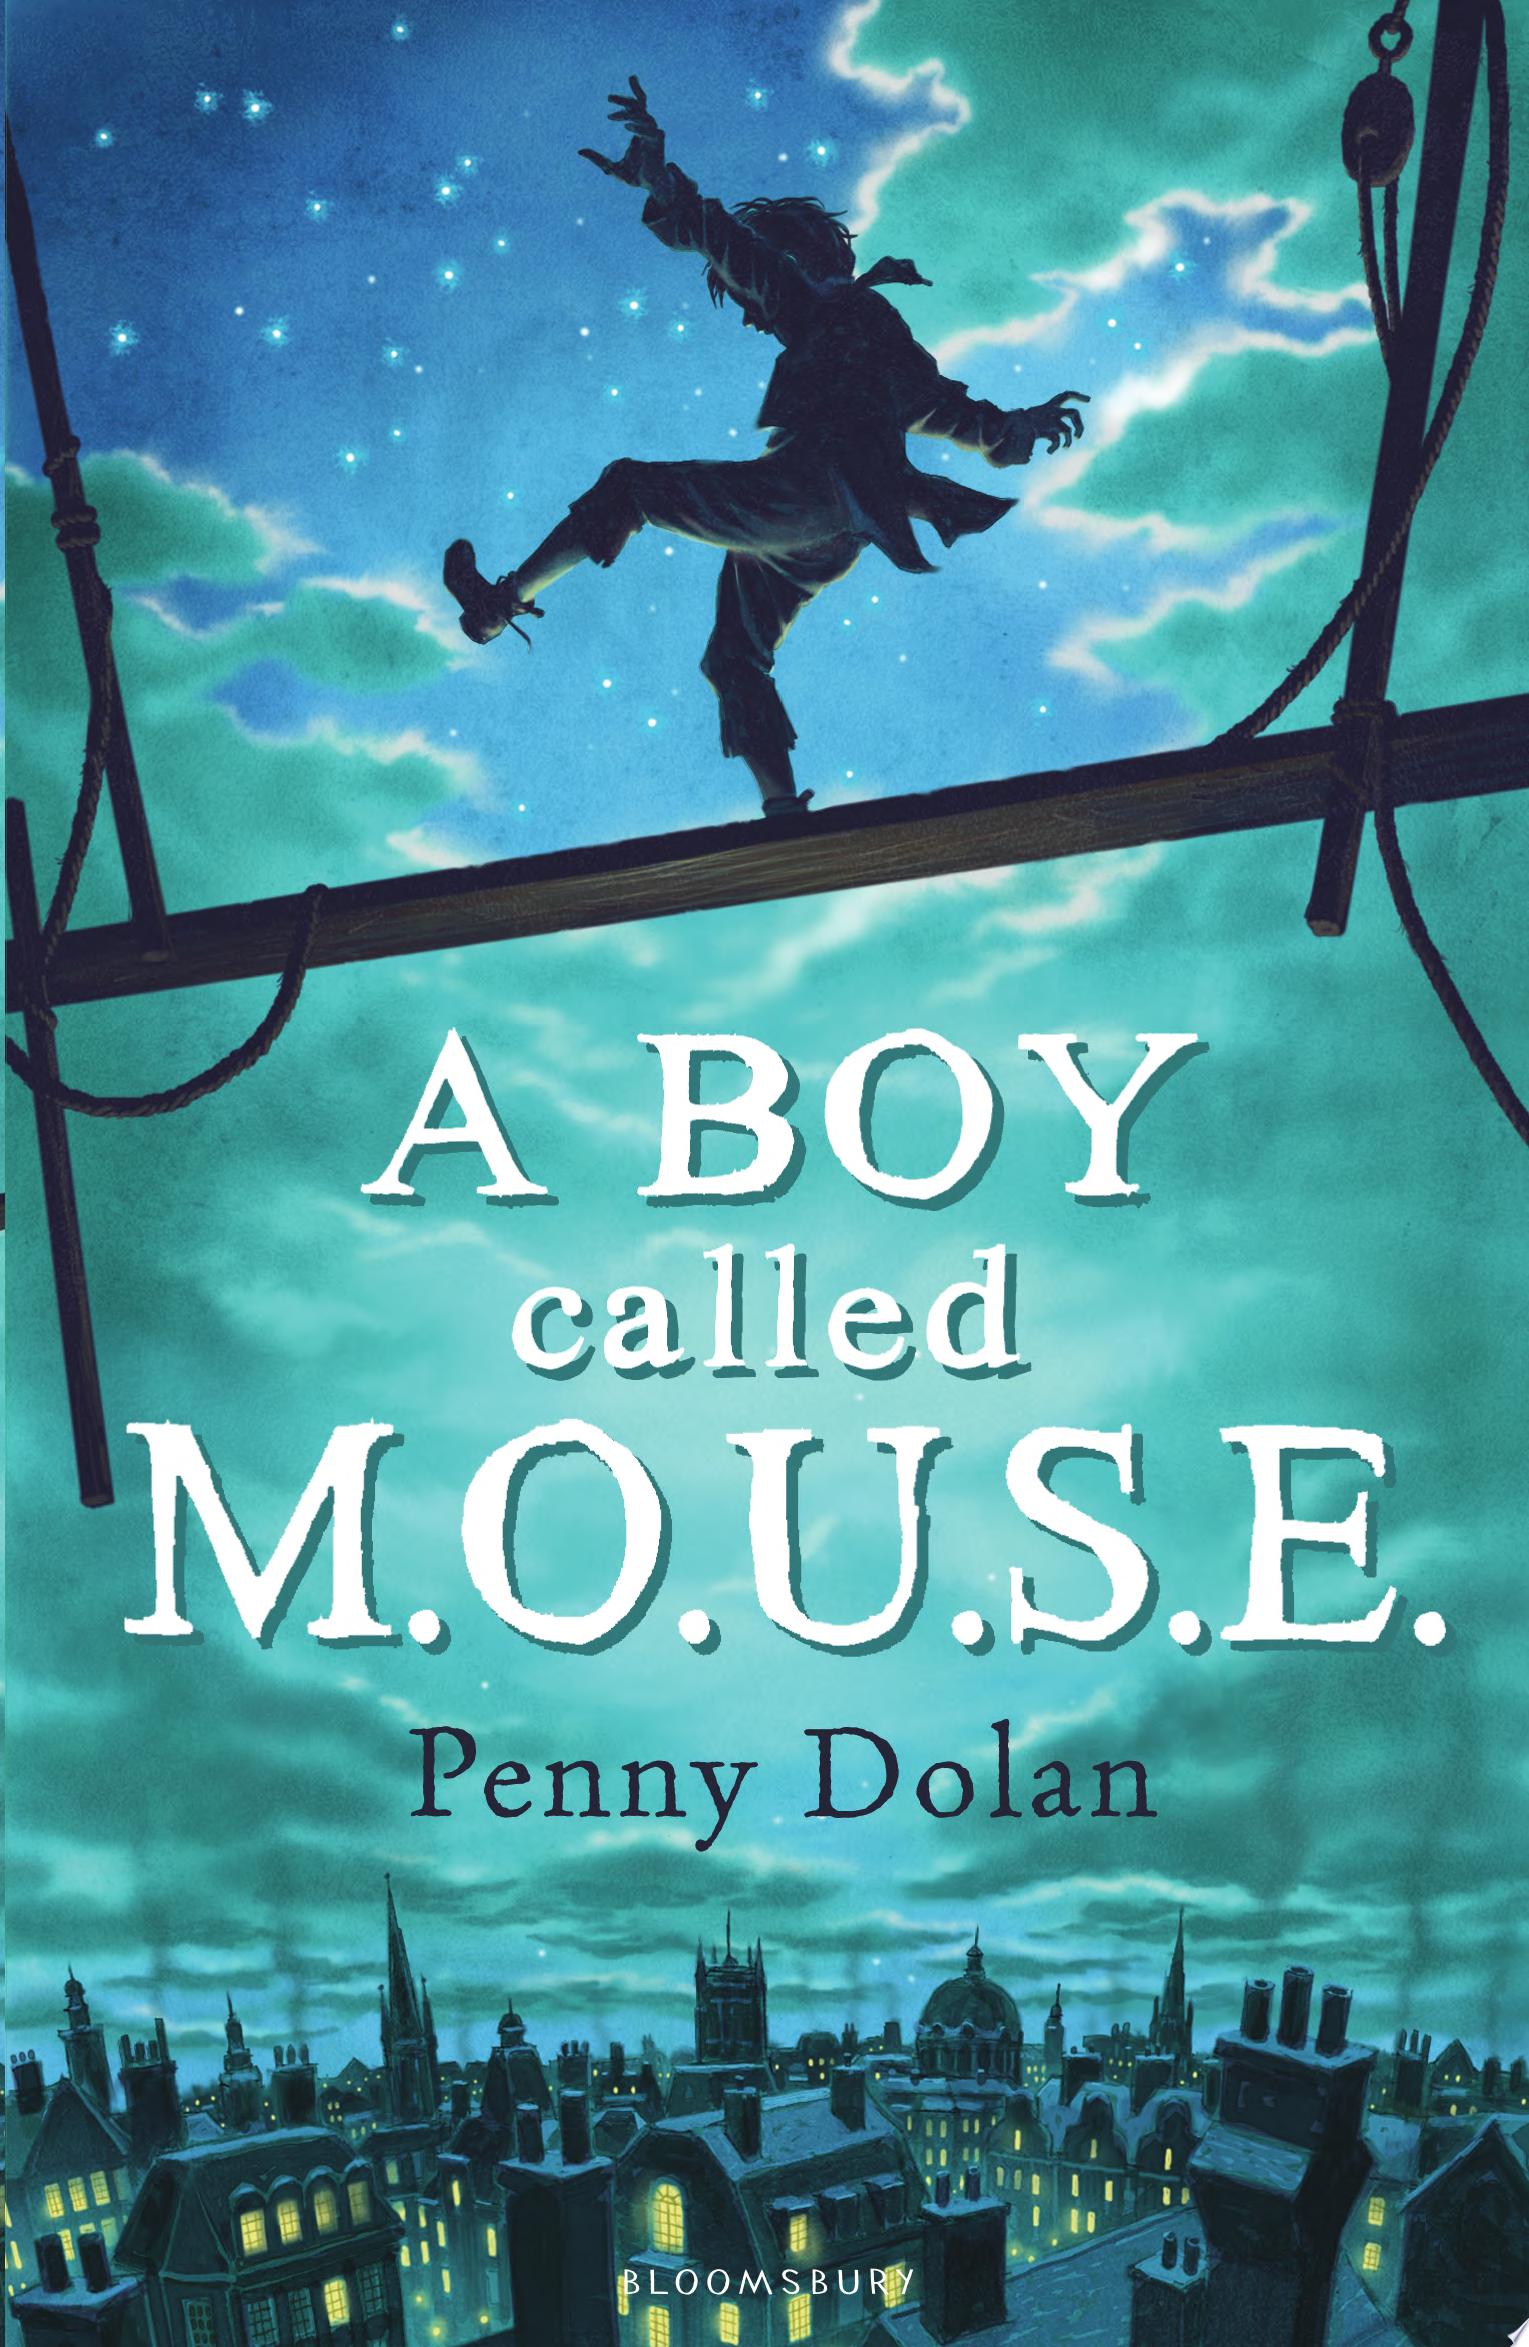 Image for "A Boy Called MOUSE"